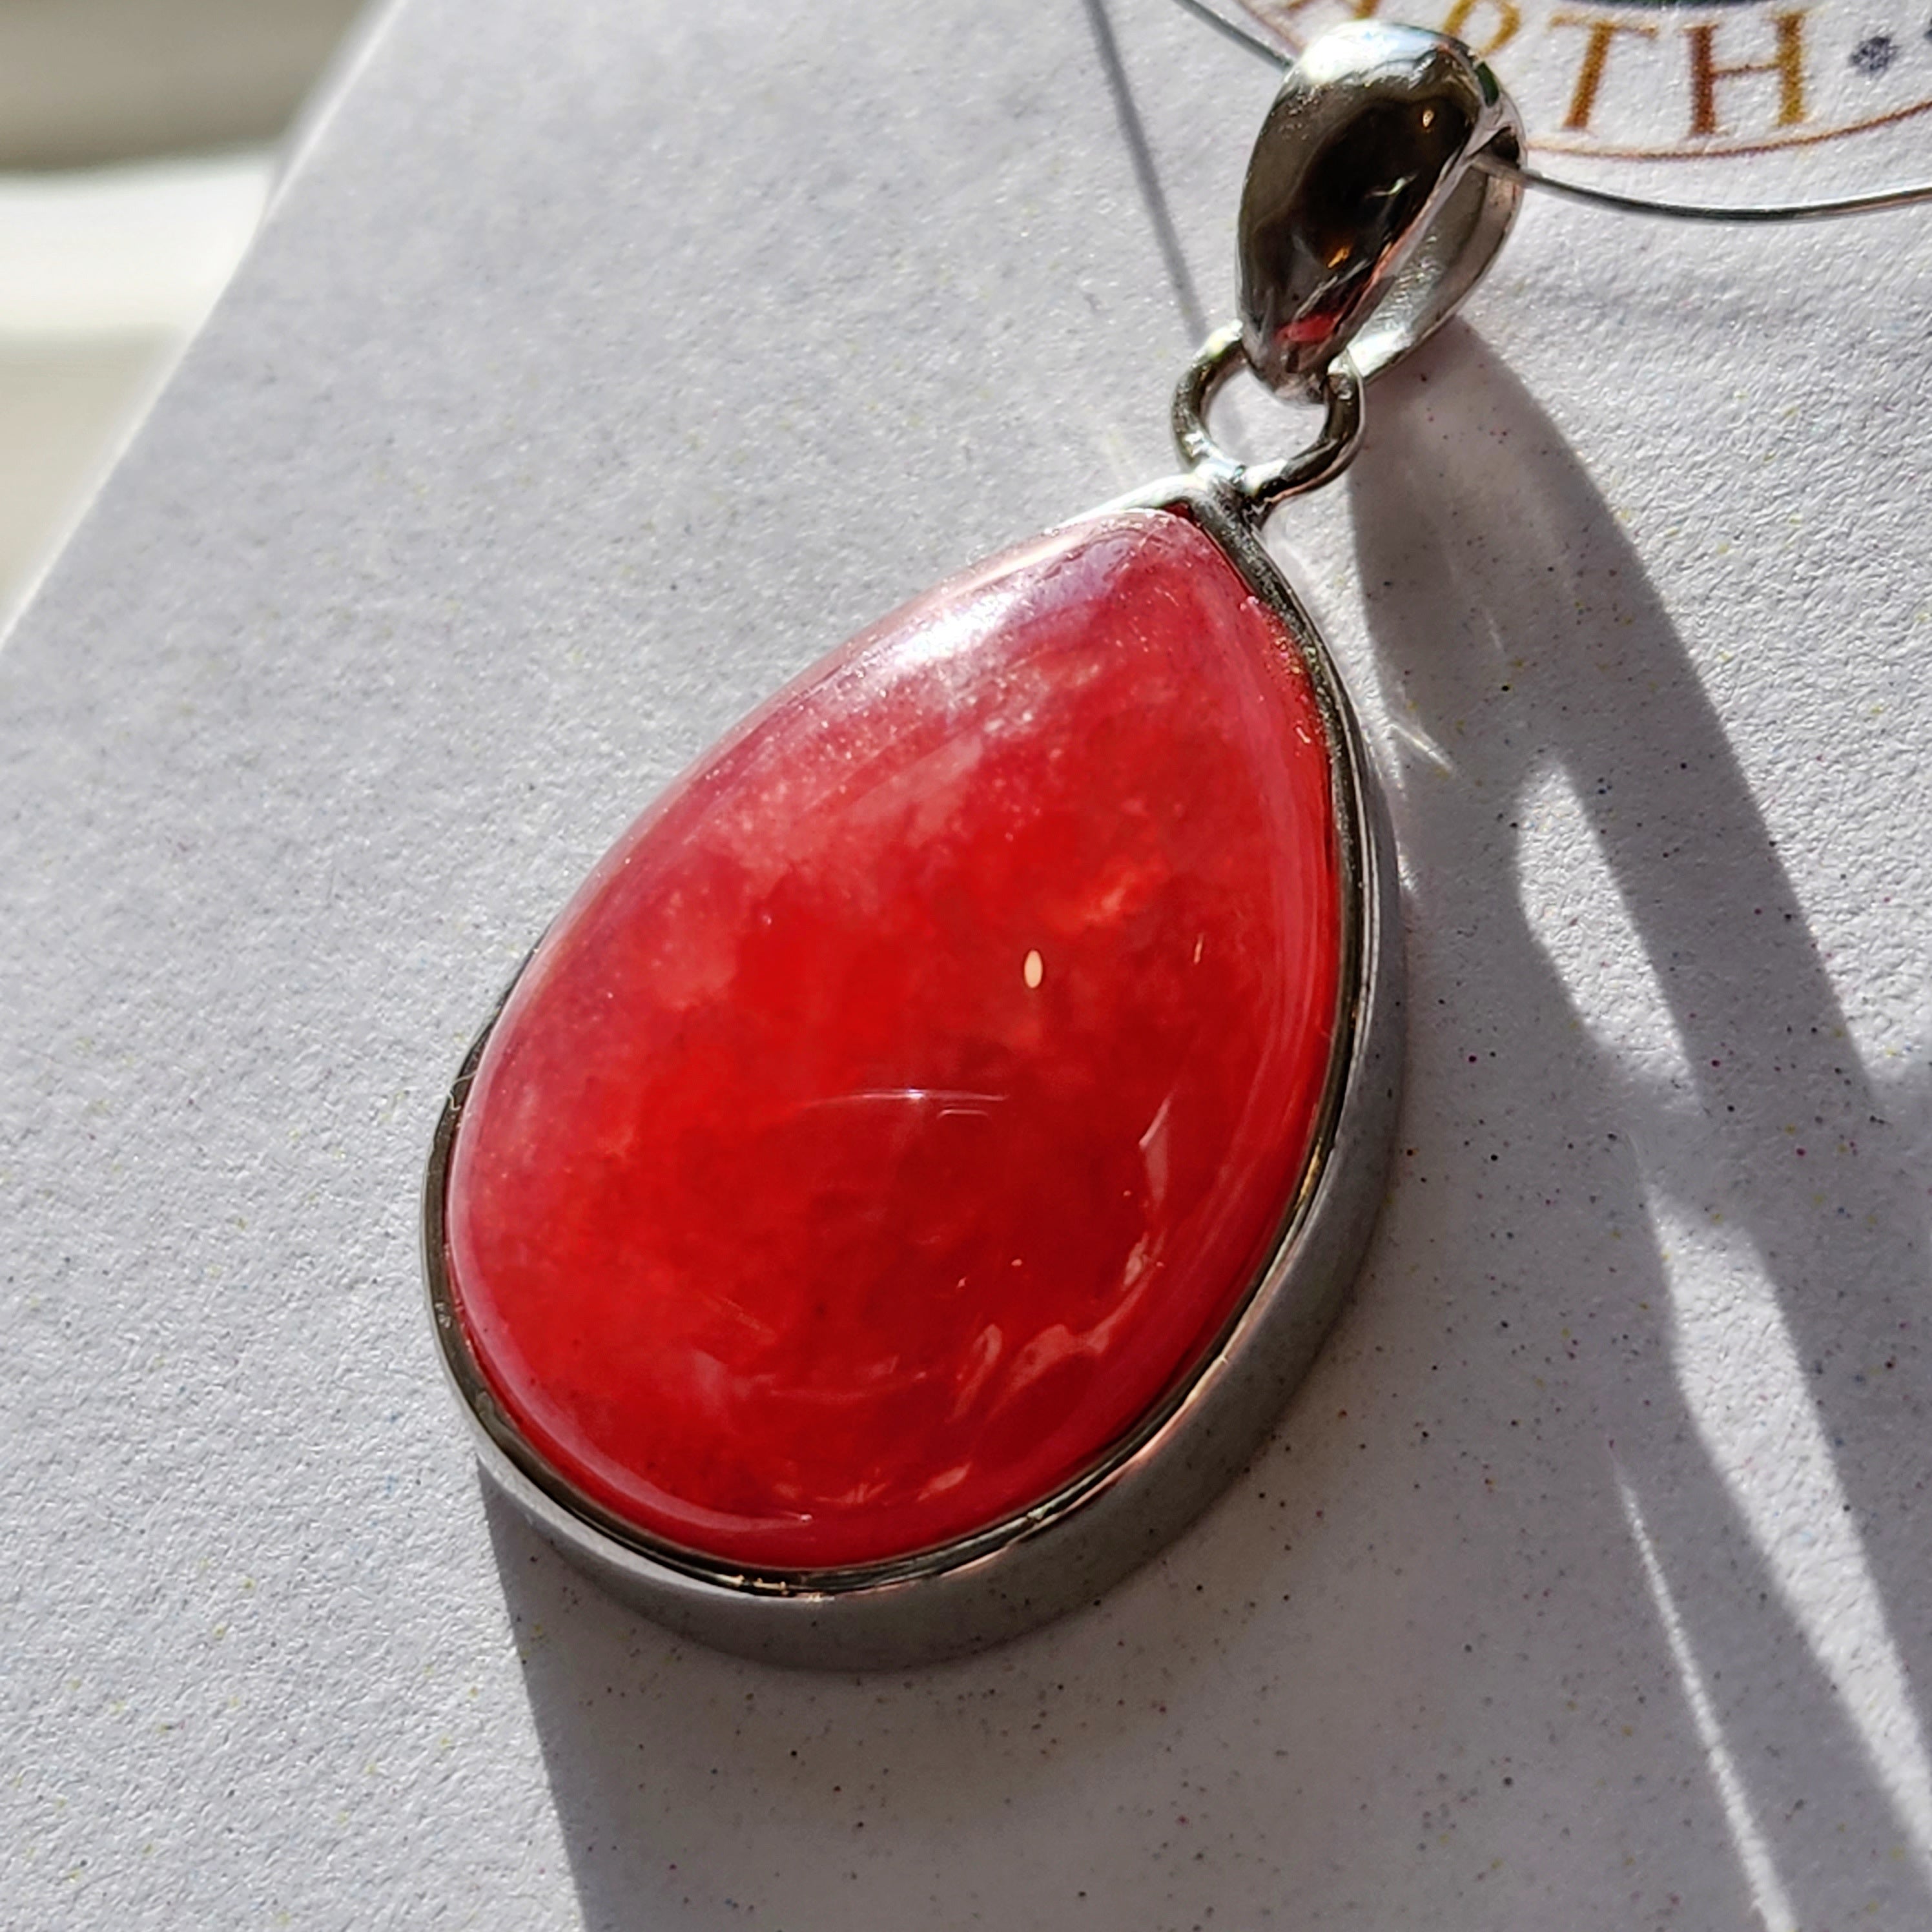 Gel Rhodochrosite Pendant .925 Silver for Heart Healing and Opening your Heart to Love